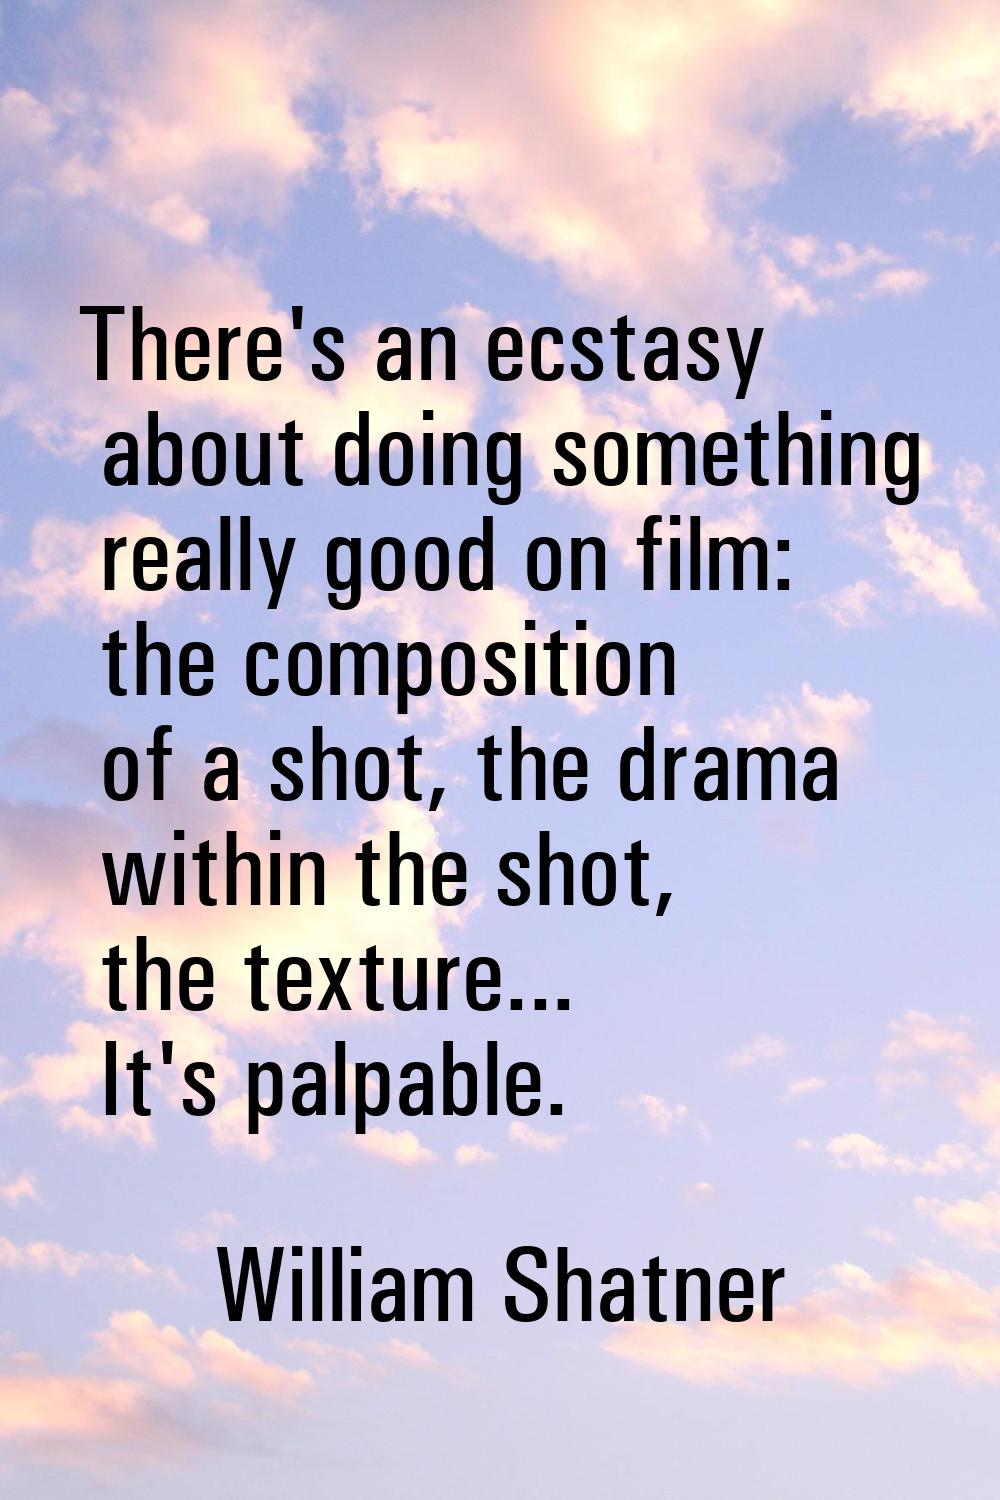 There's an ecstasy about doing something really good on film: the composition of a shot, the drama 